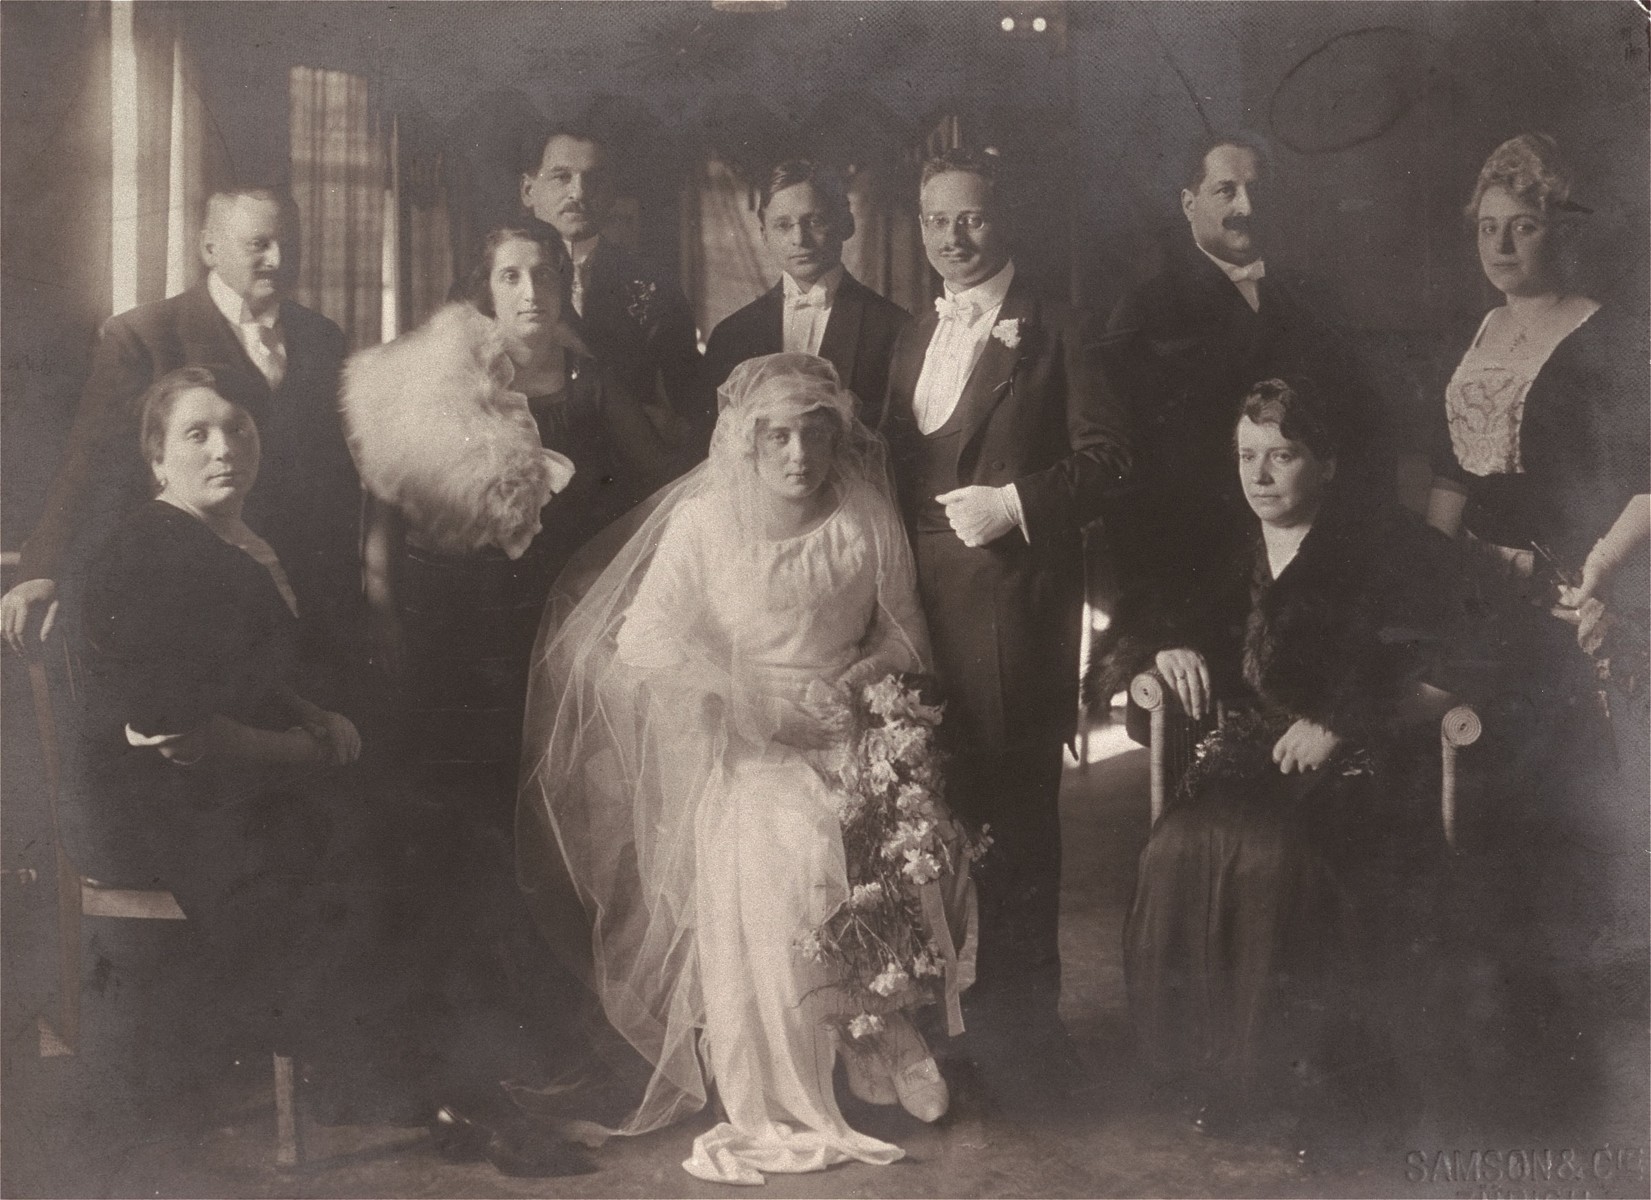 Portrait of the Braunschweig family at the wedding of Klara Braunschweig Woltar and Egon Kafka.
  
Pictured from left to right are: Leone and Leopold Blatt (Klara's sister and brother-in-law); Isaac Braunschweig (Klara's half brother) and his wife; and Herbert Braunschweig (Klara's brother); Egon Kafka; Rene and Bertha (Braunschweig) Weil (Klara's brother-in-law and sister). Sitting on the right is Regine Braunschweig (Klara's half sister).